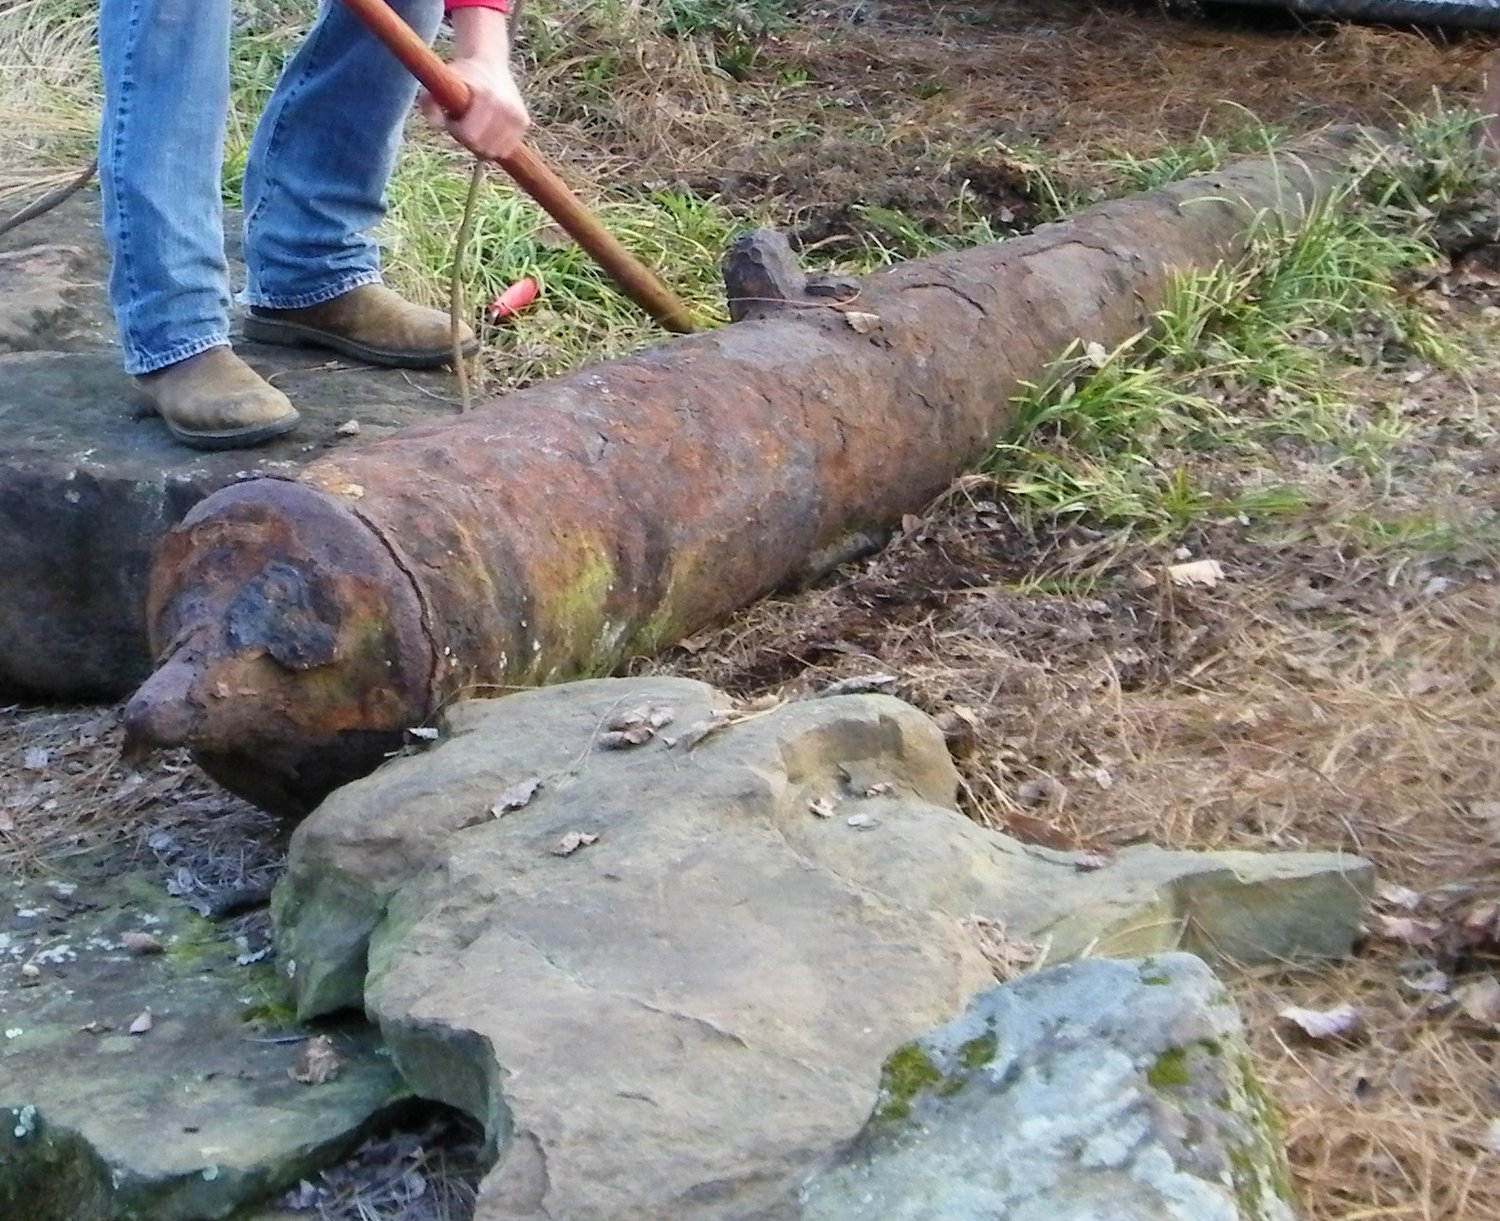 Spanish Fort city crews and residents excavate a cannon found in the city in 2017. After more than three years of preservation work, the gun will go on display at Spanish Fort City Hall. Officials said they do not know for certain how old the cannon is or how it came to be at the site.